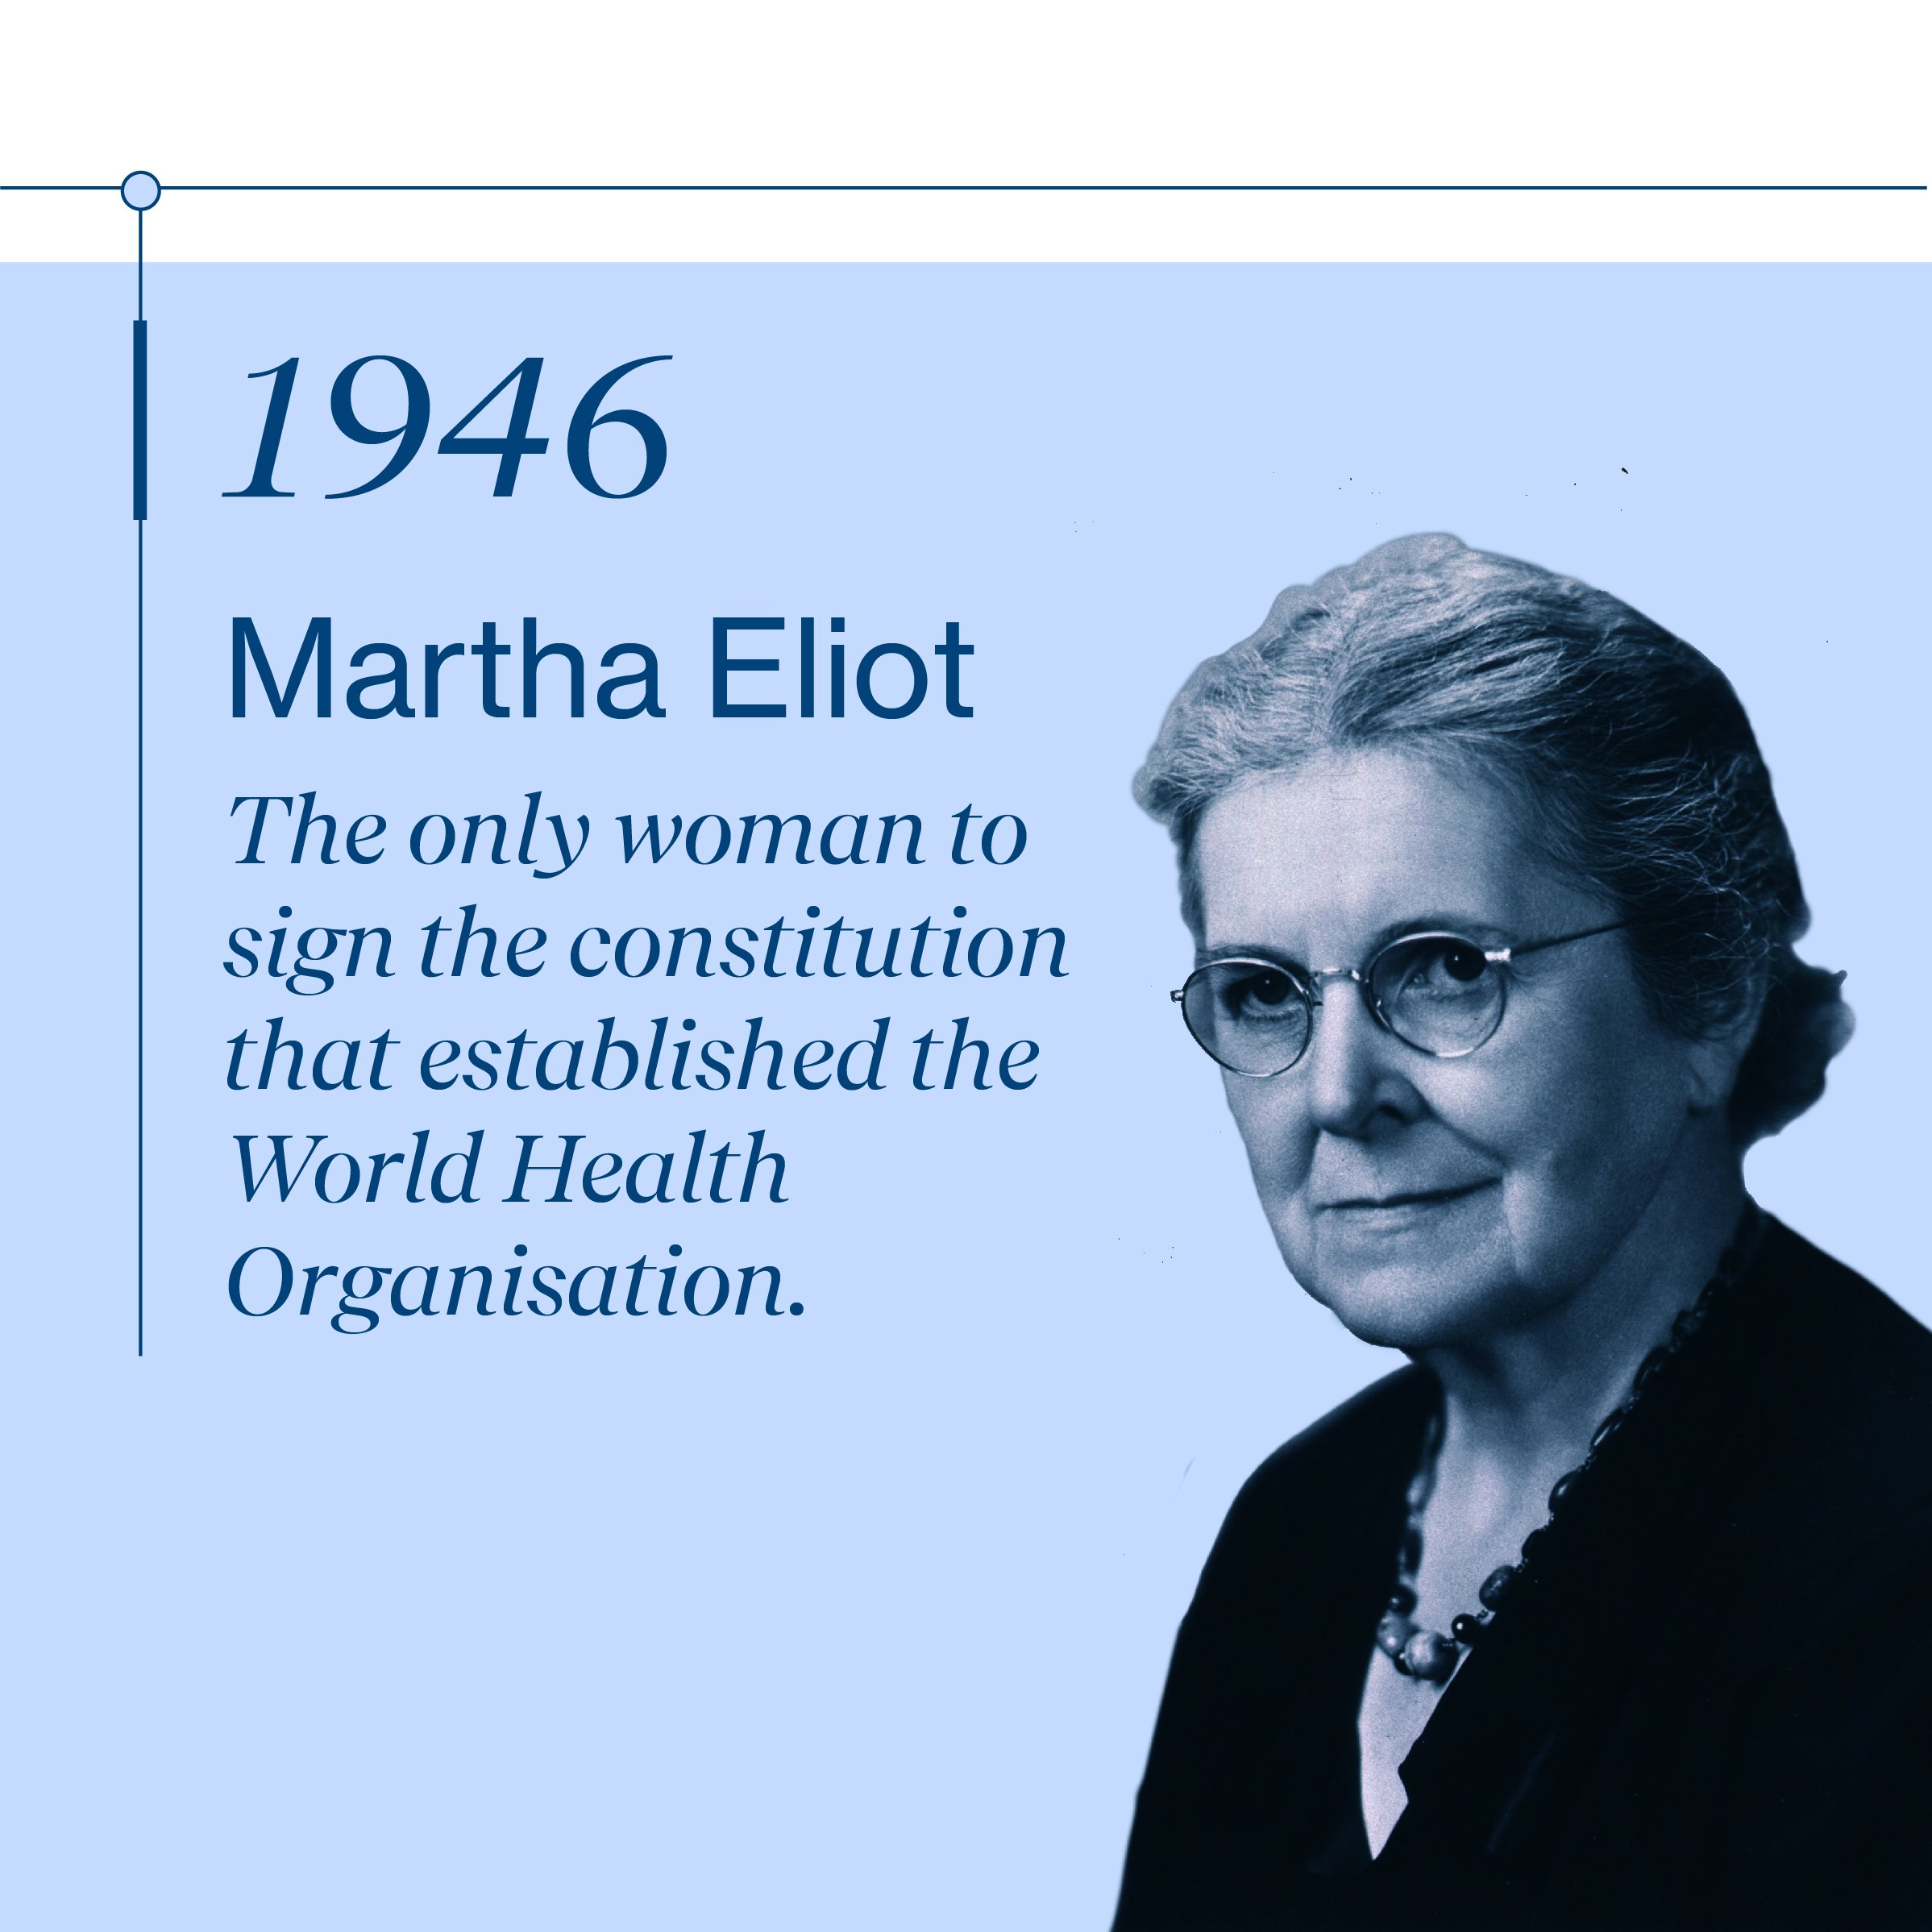 Women's History Month 20222: 10 women medical pioneers who revolutionized  healthcare